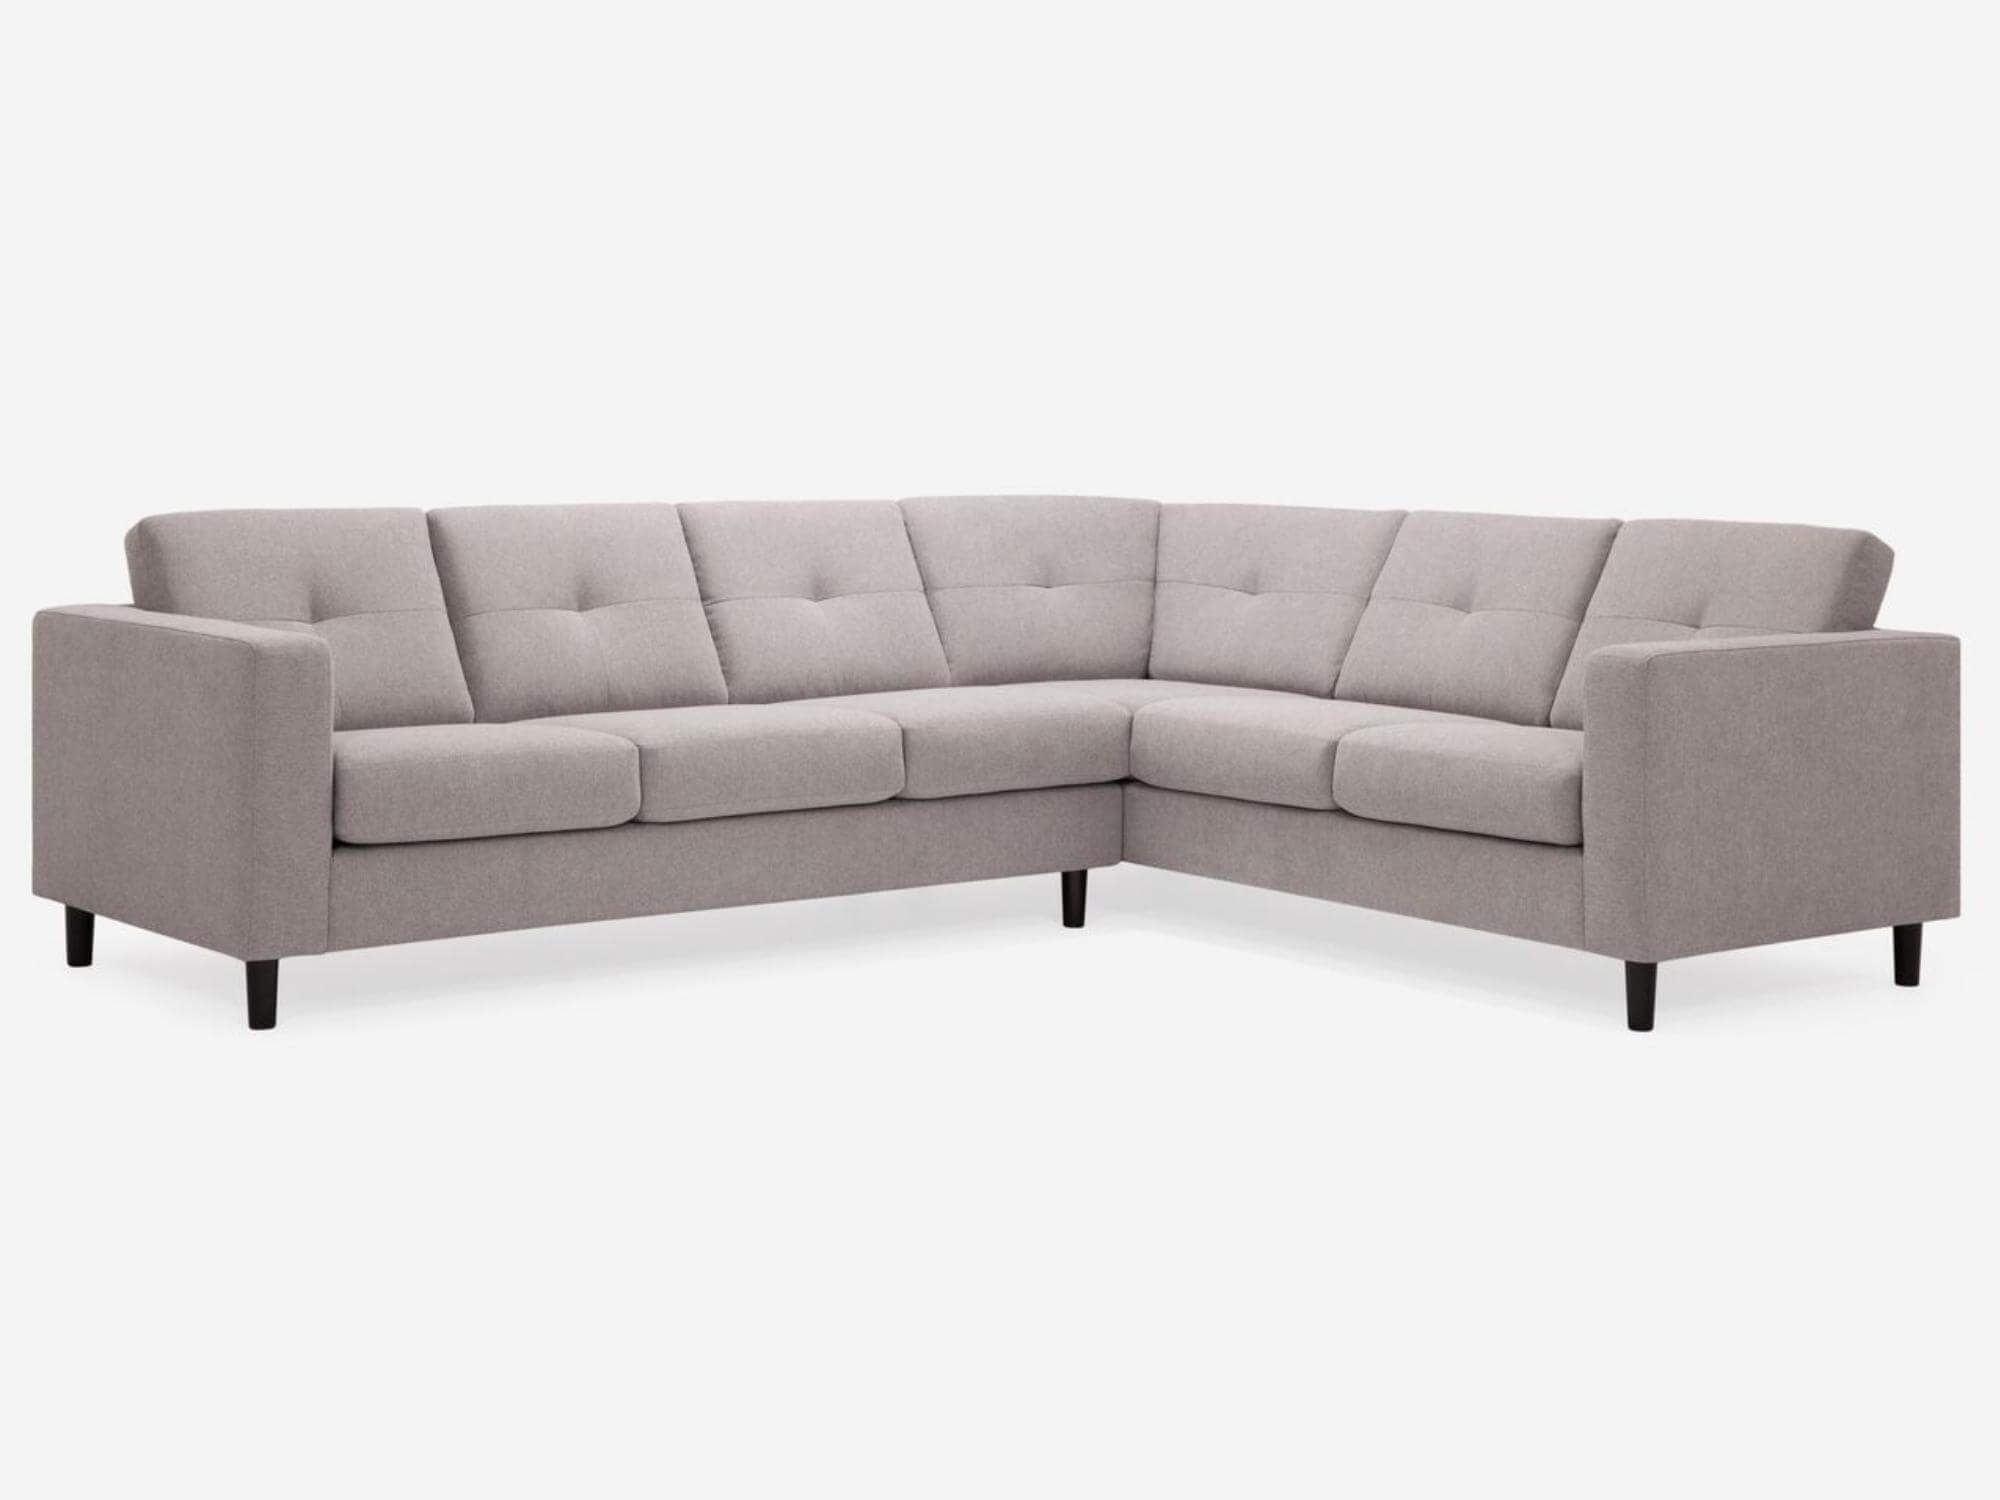 Eq3 Solo 6 Seat Sectional Sofa | Living Room Furniture Online Pertaining To 6 Seater Sectional Couches (View 4 of 20)